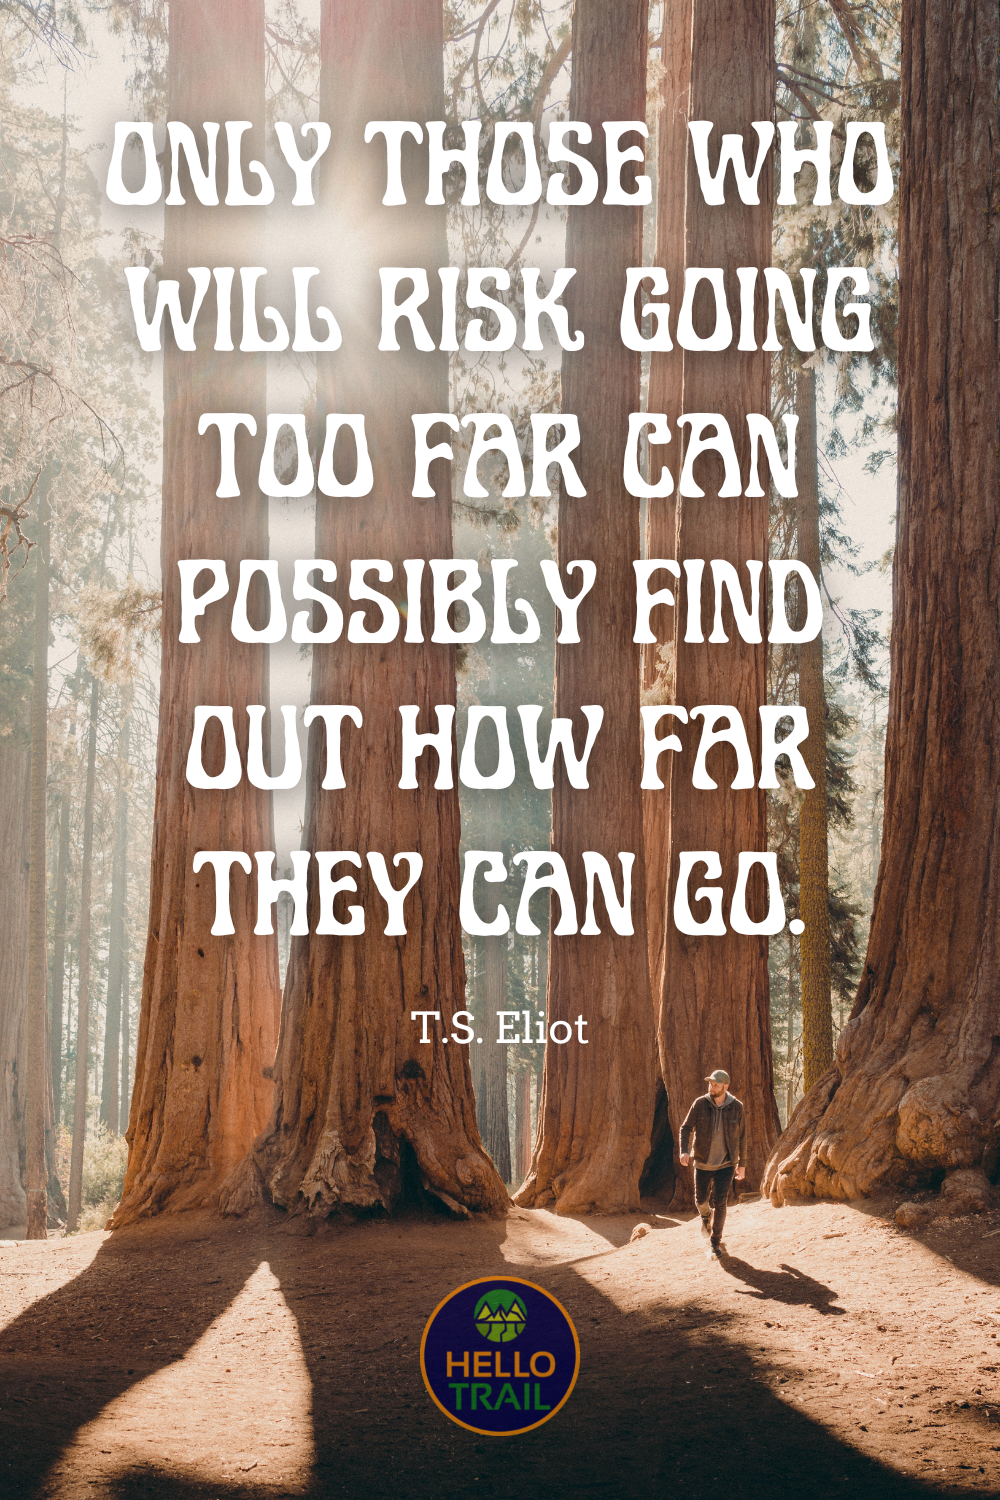 T.S. Eliot inspirational quote with man walking in the woods